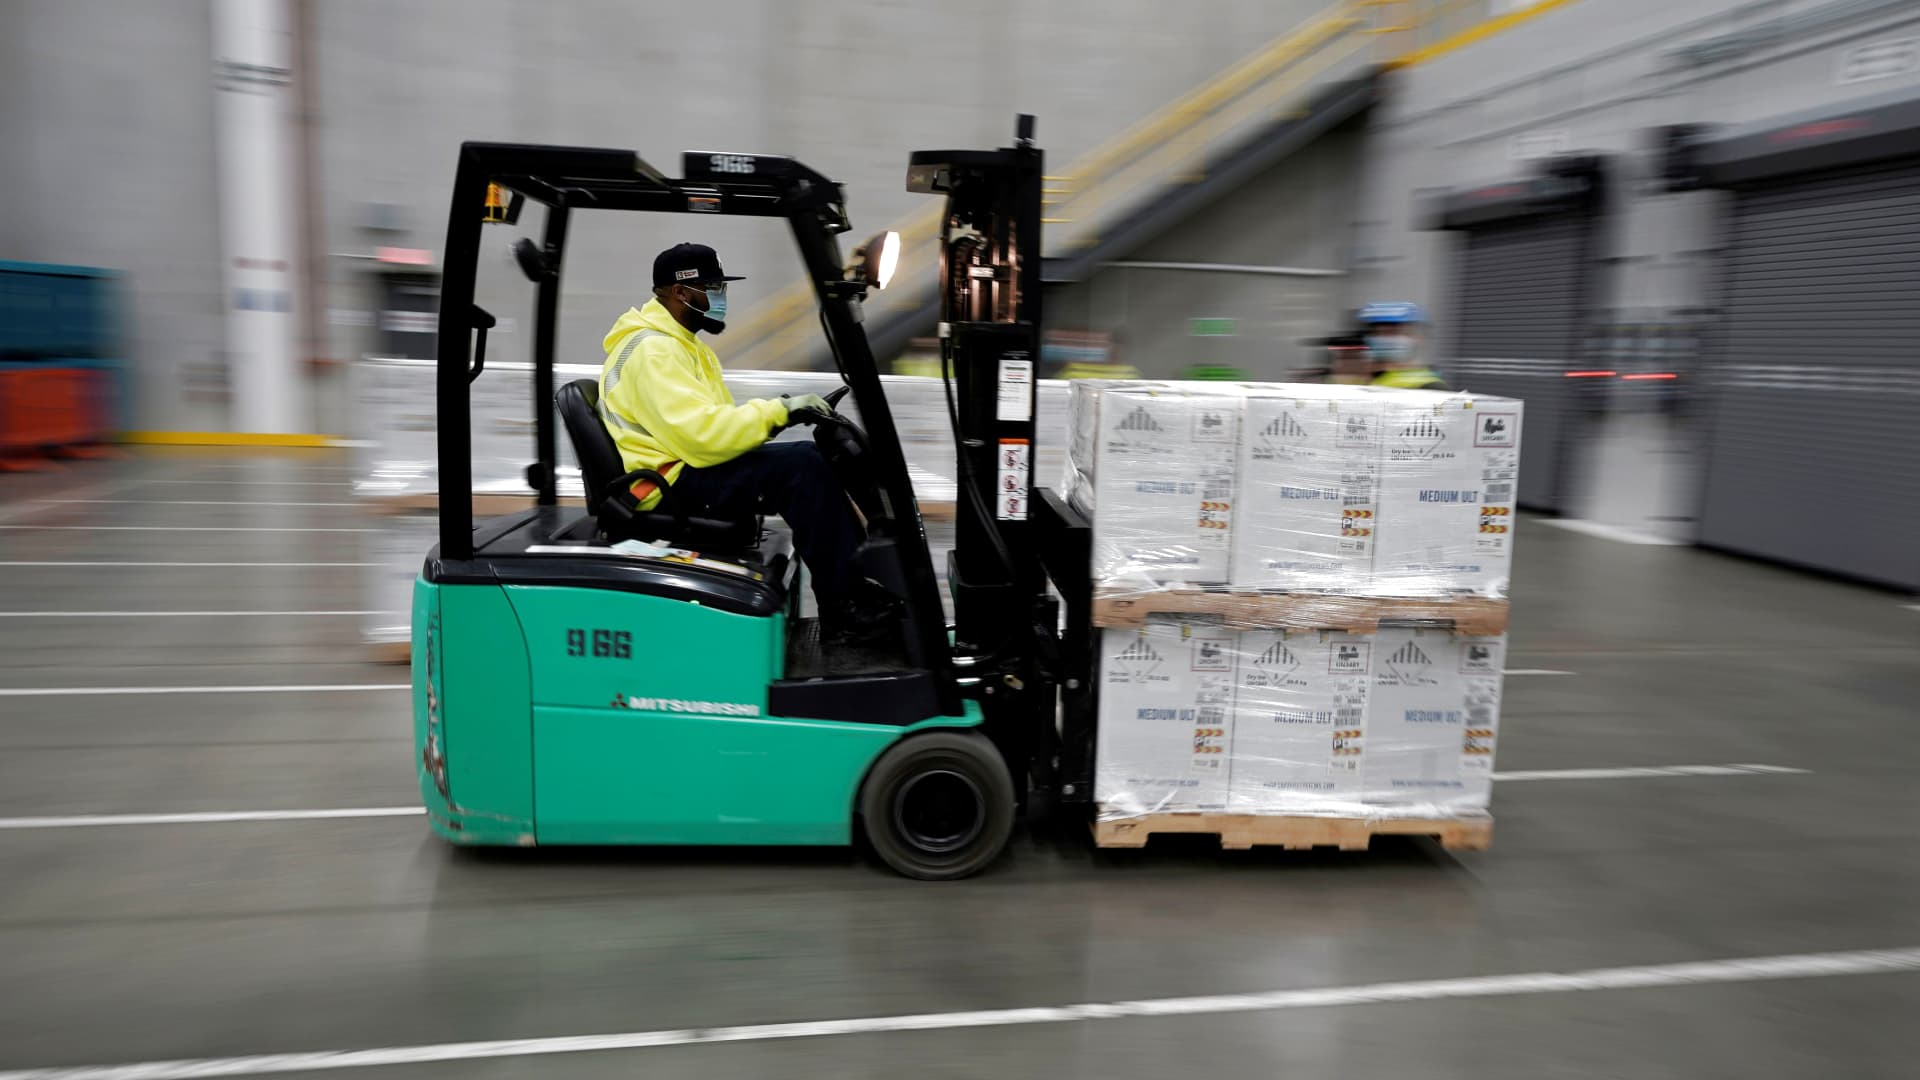 Boxes containing the Pfizer-BioNTech COVID-19 vaccine are prepared to be shipped at the Pfizer Global Supply Kalamazoo manufacturing plant in Portage, Michigan, December 13, 2020.